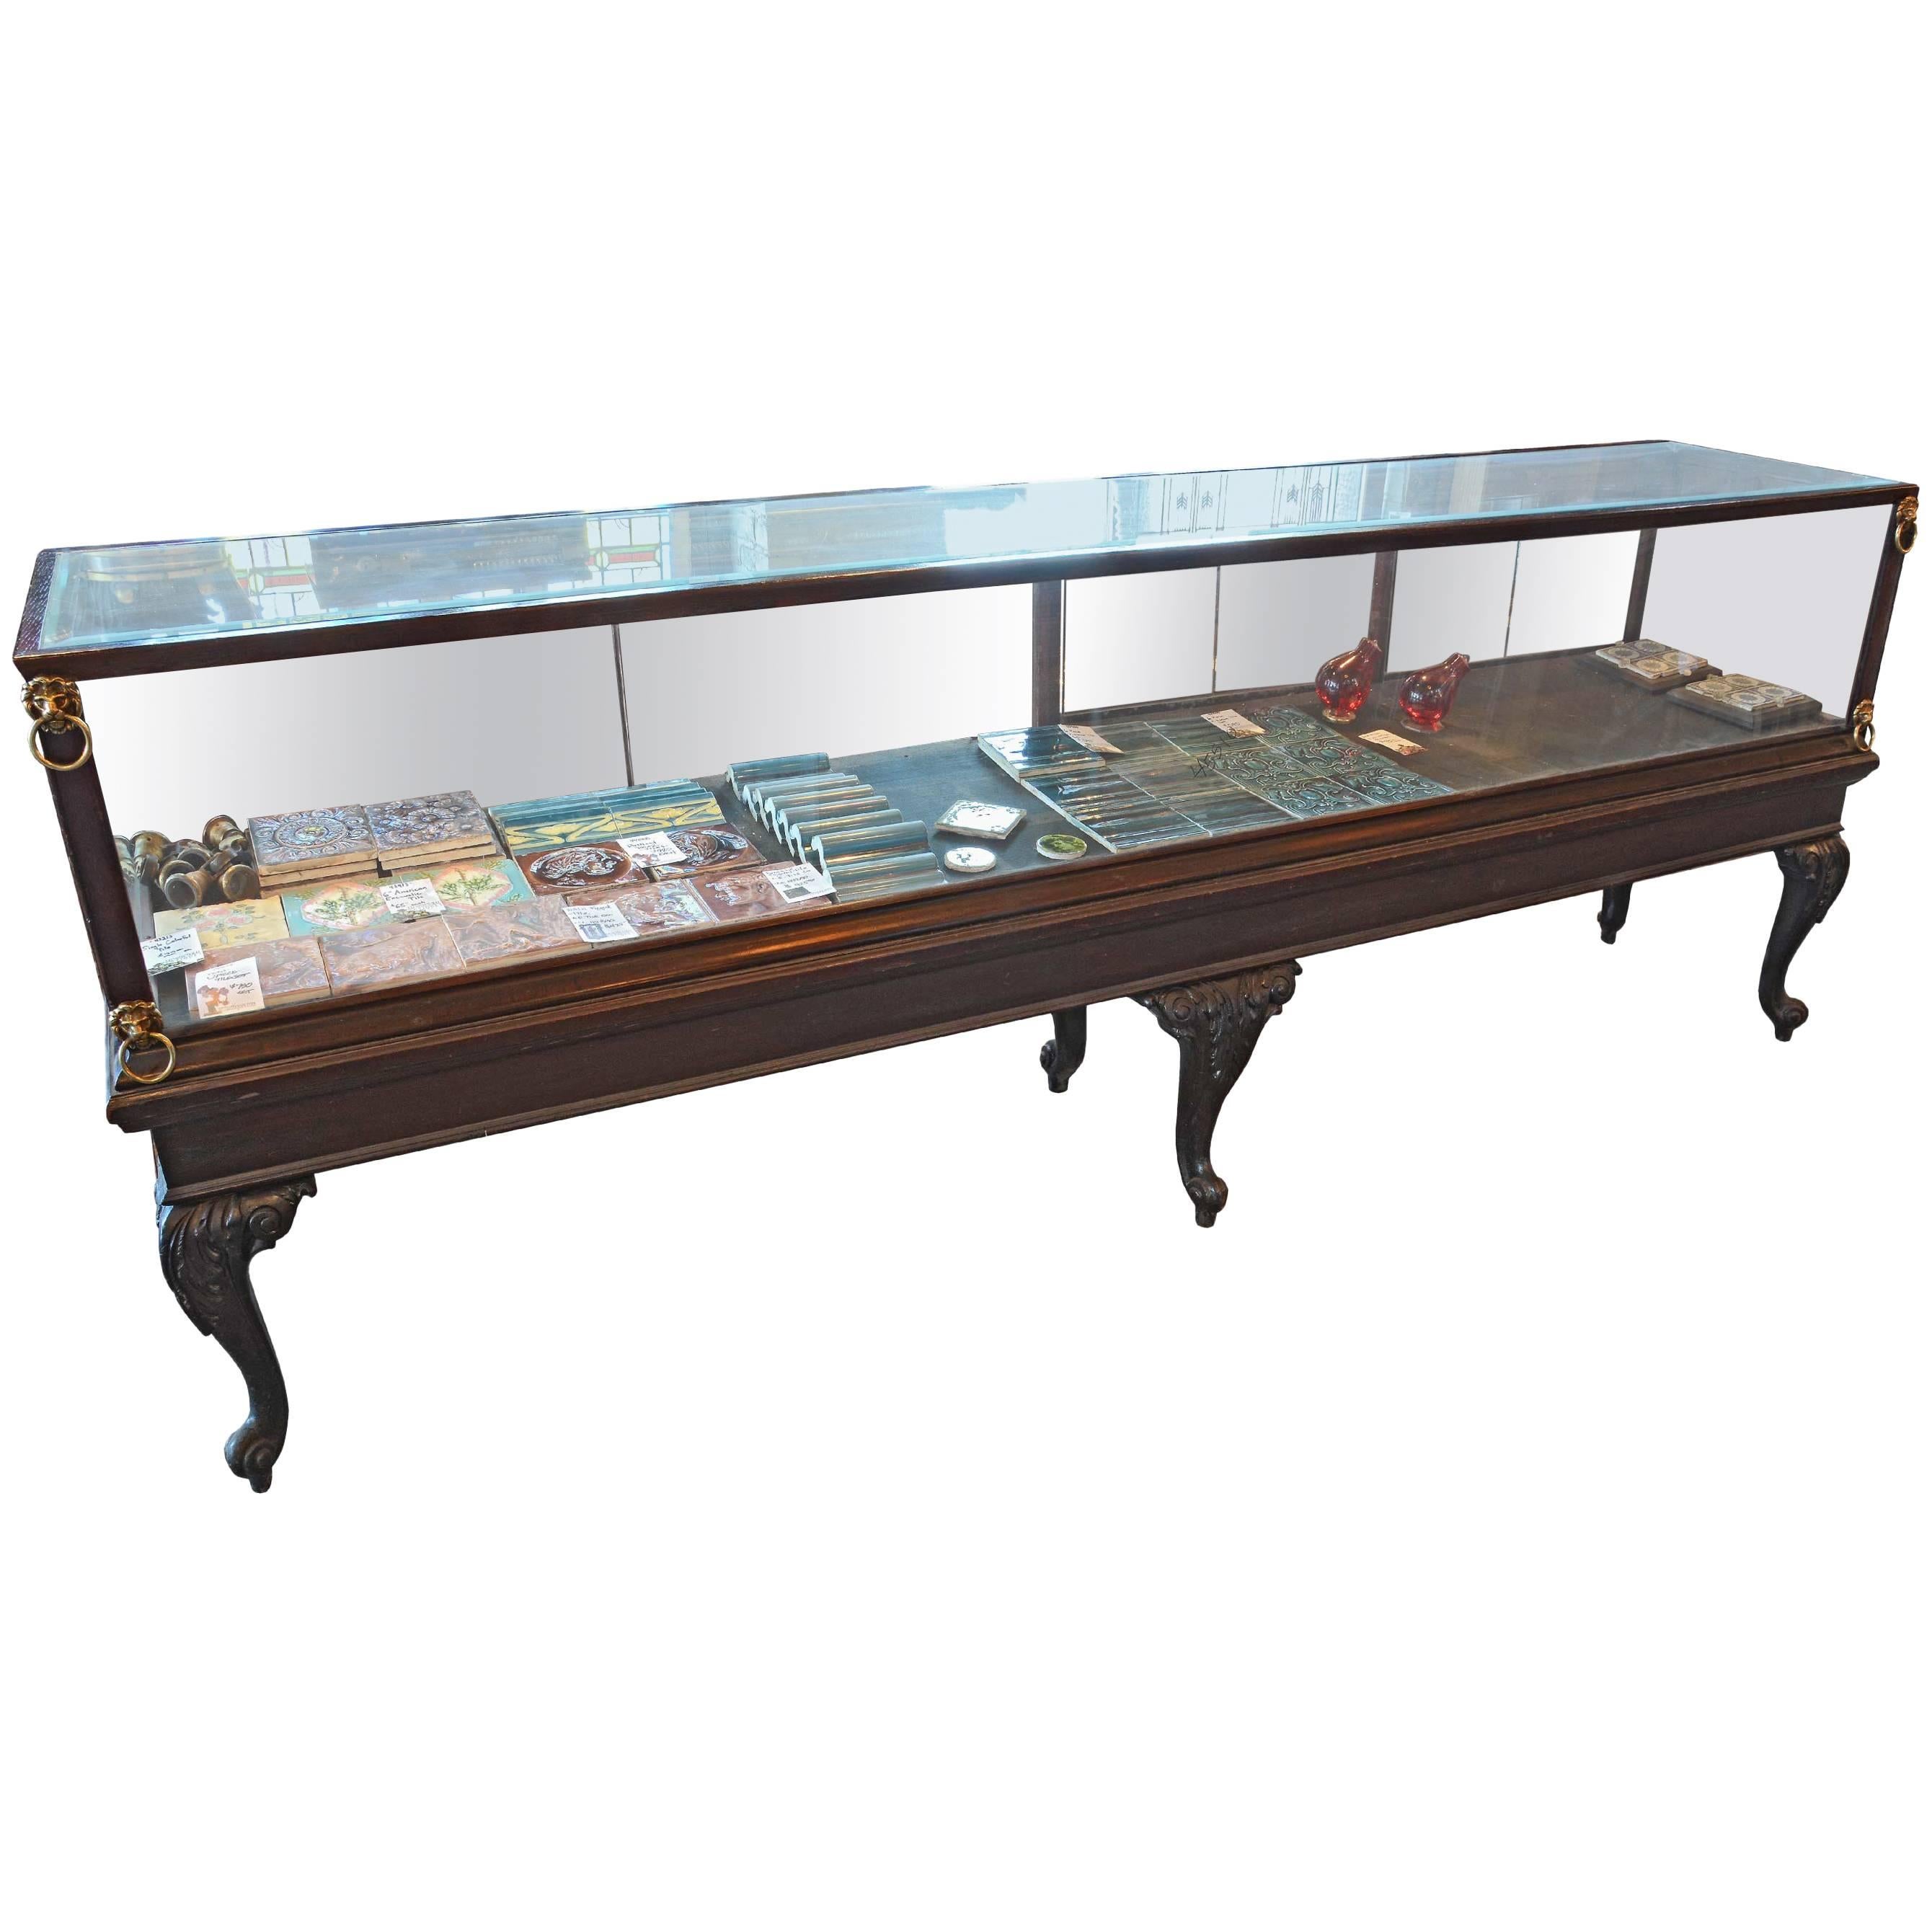 Mahogany Display Case with Glass Lions, circa 1910